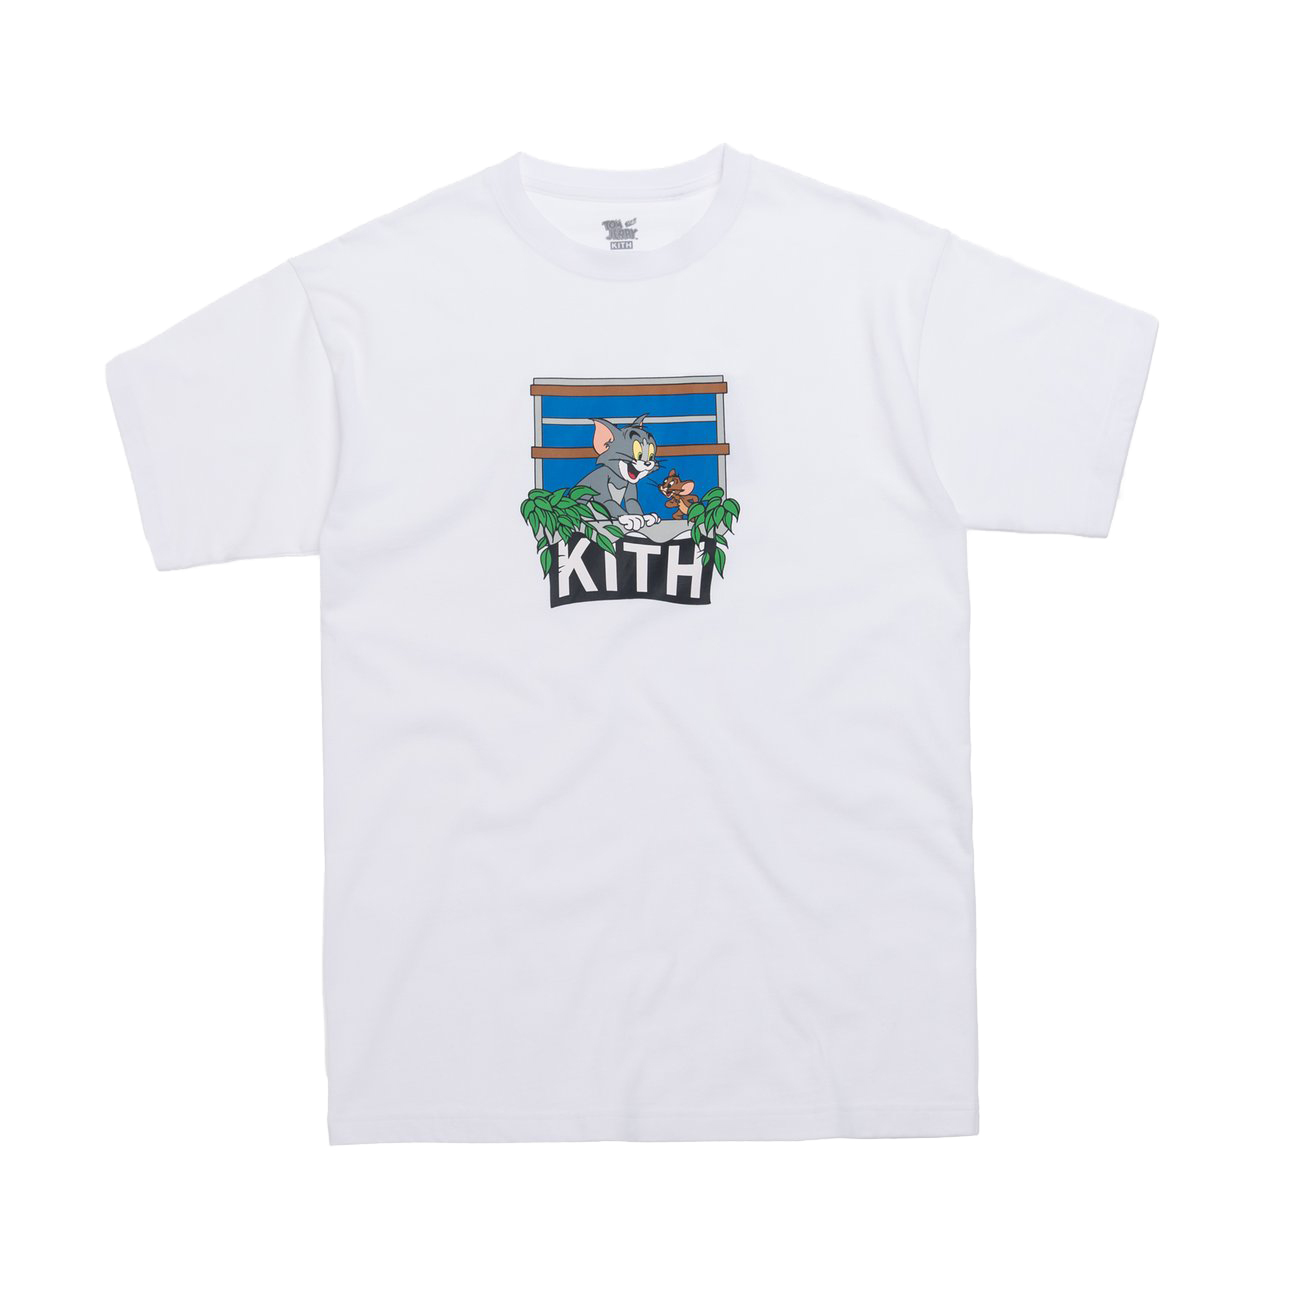 Kith x Tom u0026 Jerry Hang Out Tee White Men's - SS19 - GB